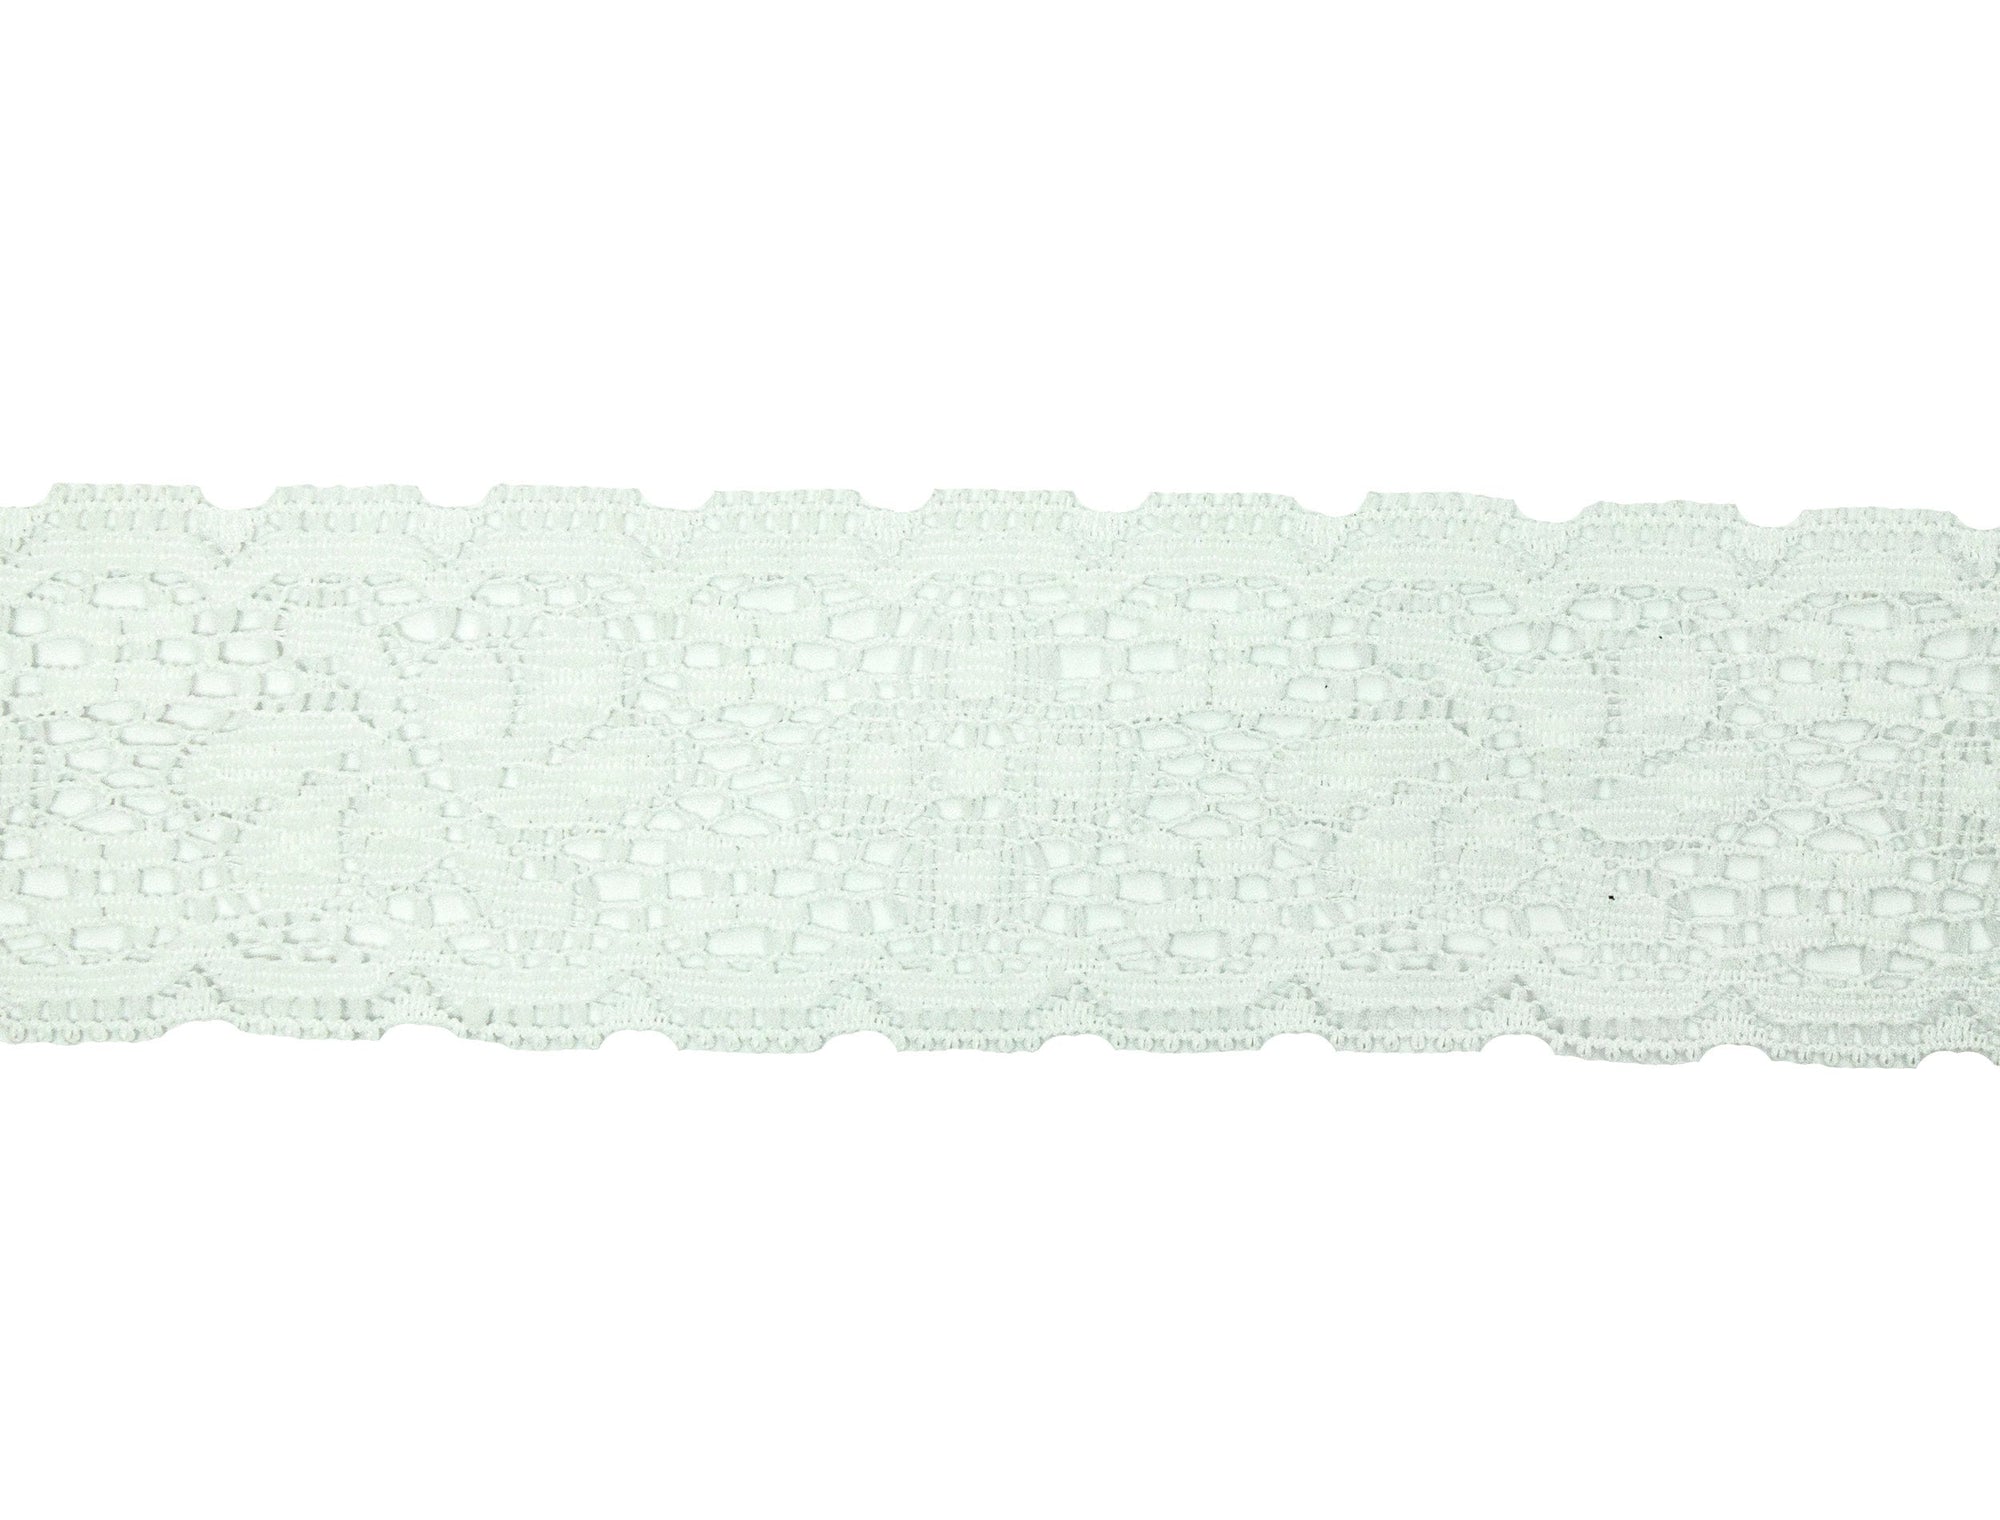 Vintage Lace White Straight Edge 1 1/2" Wide - One Piece 3 Yards 22" Length